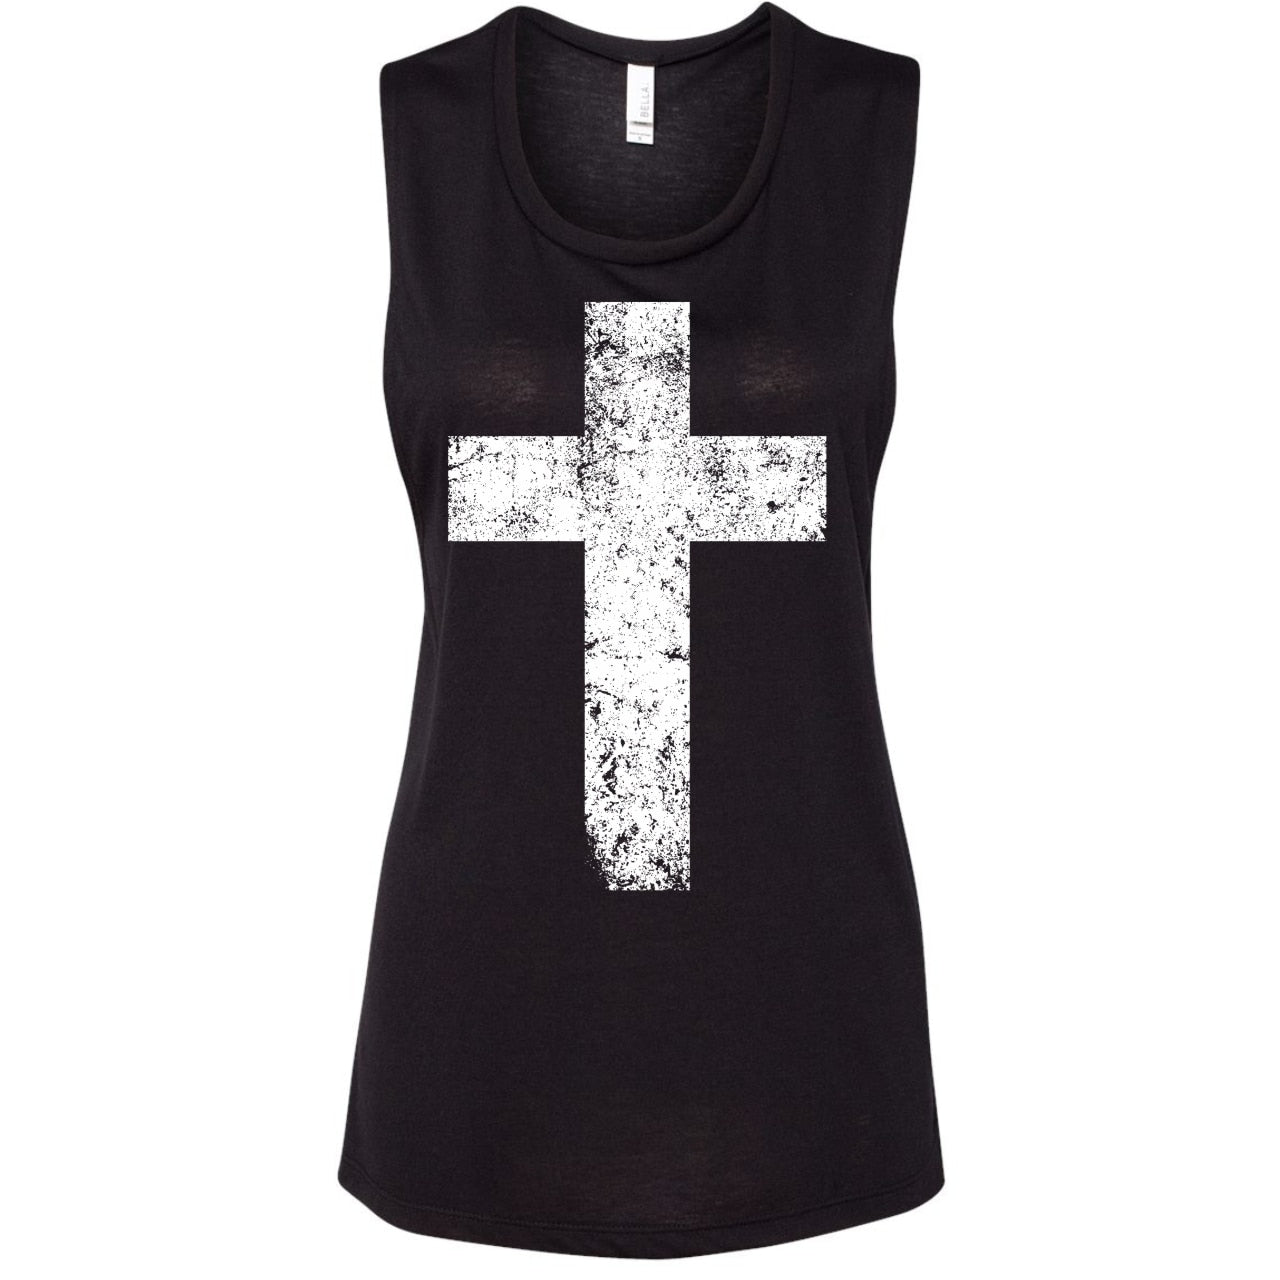 Cross - Ladies Flowy Tank with White Print - The Graphic Tee